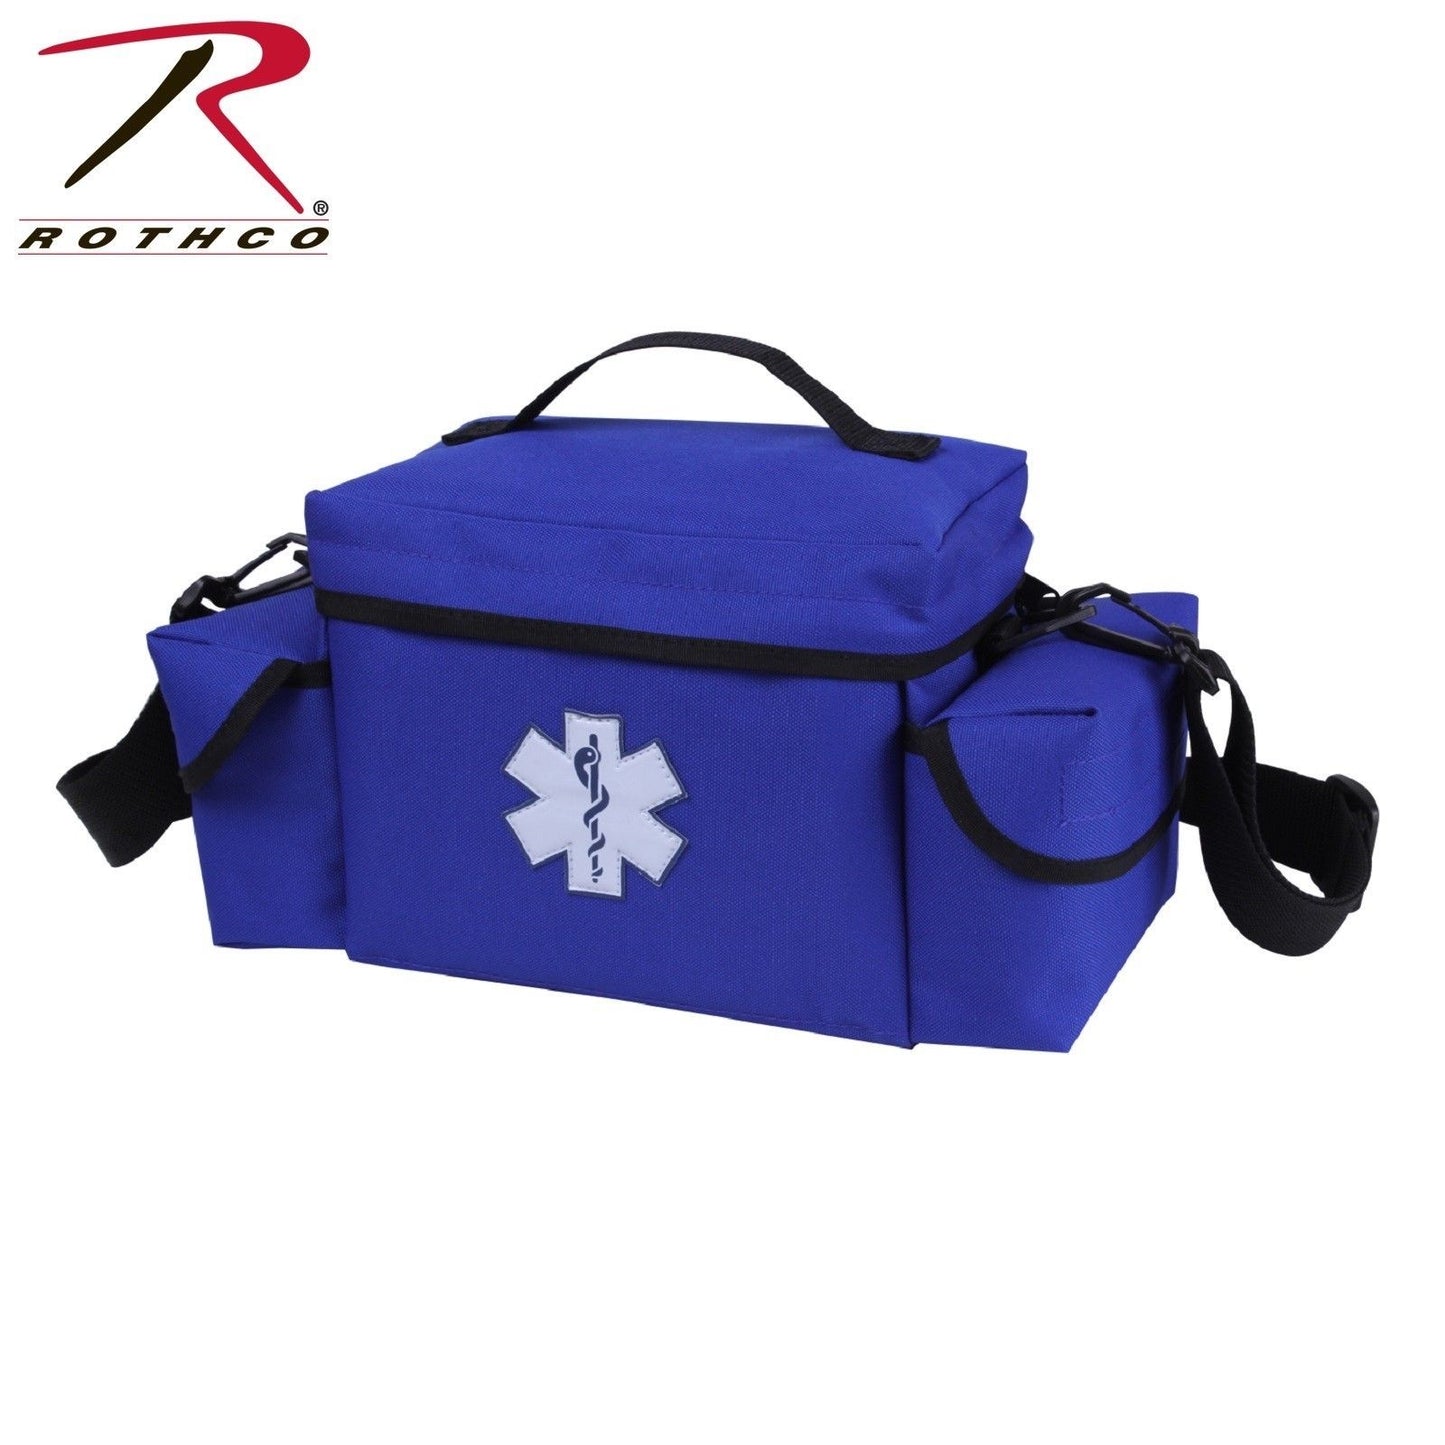 Blue EMS EMT Rescue Bag With Star Of Life Symbol - Small Medic Bag by Rothco